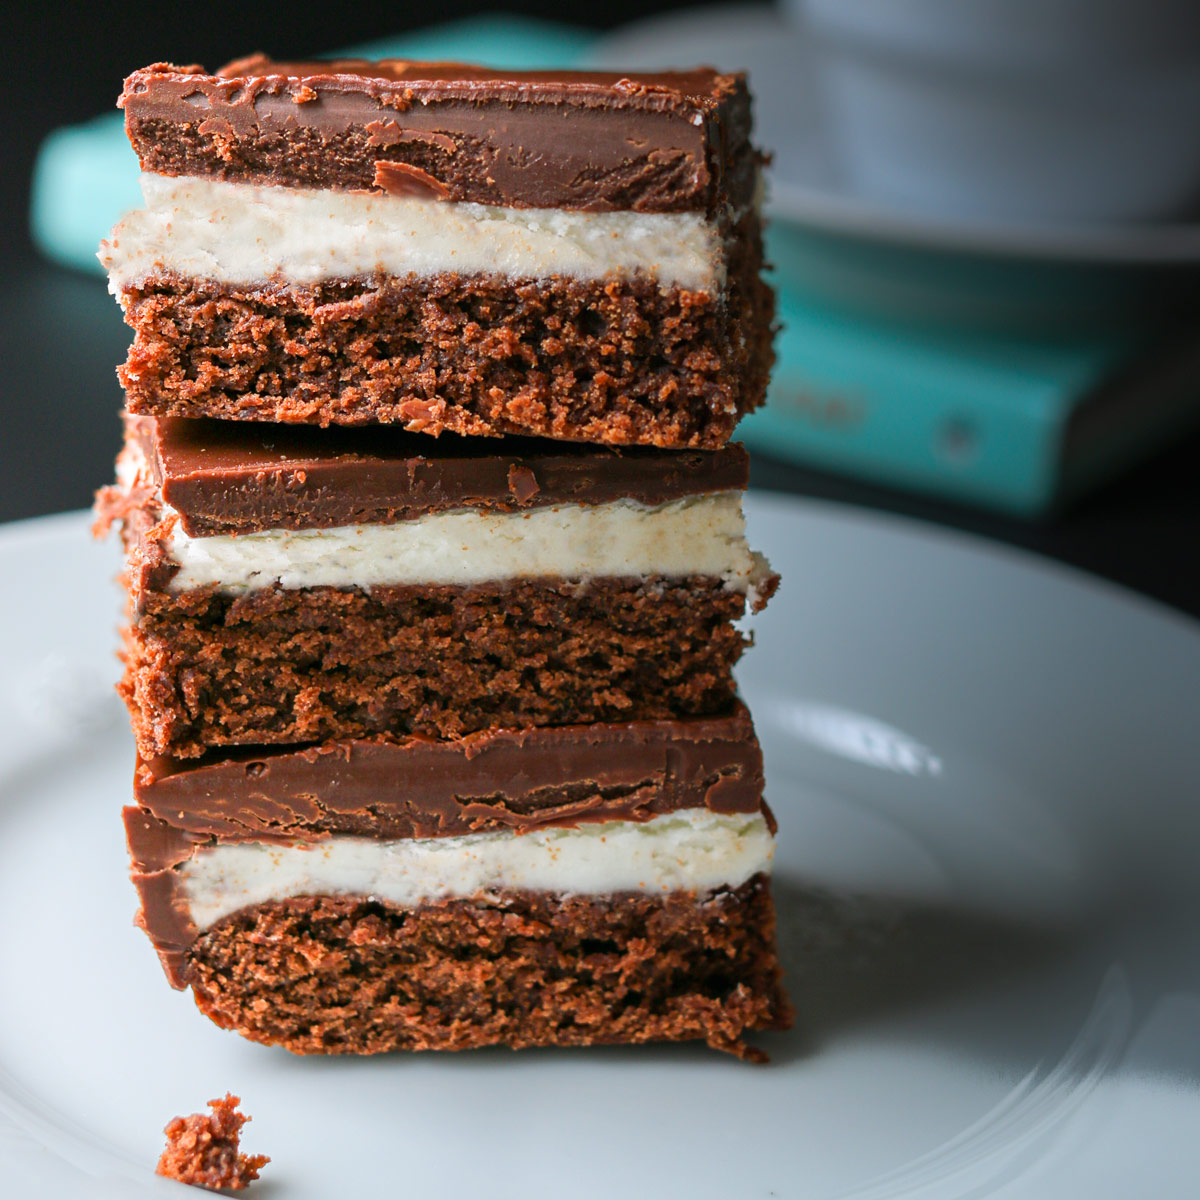 stack of chocolate mint brownies on a plate near a book.